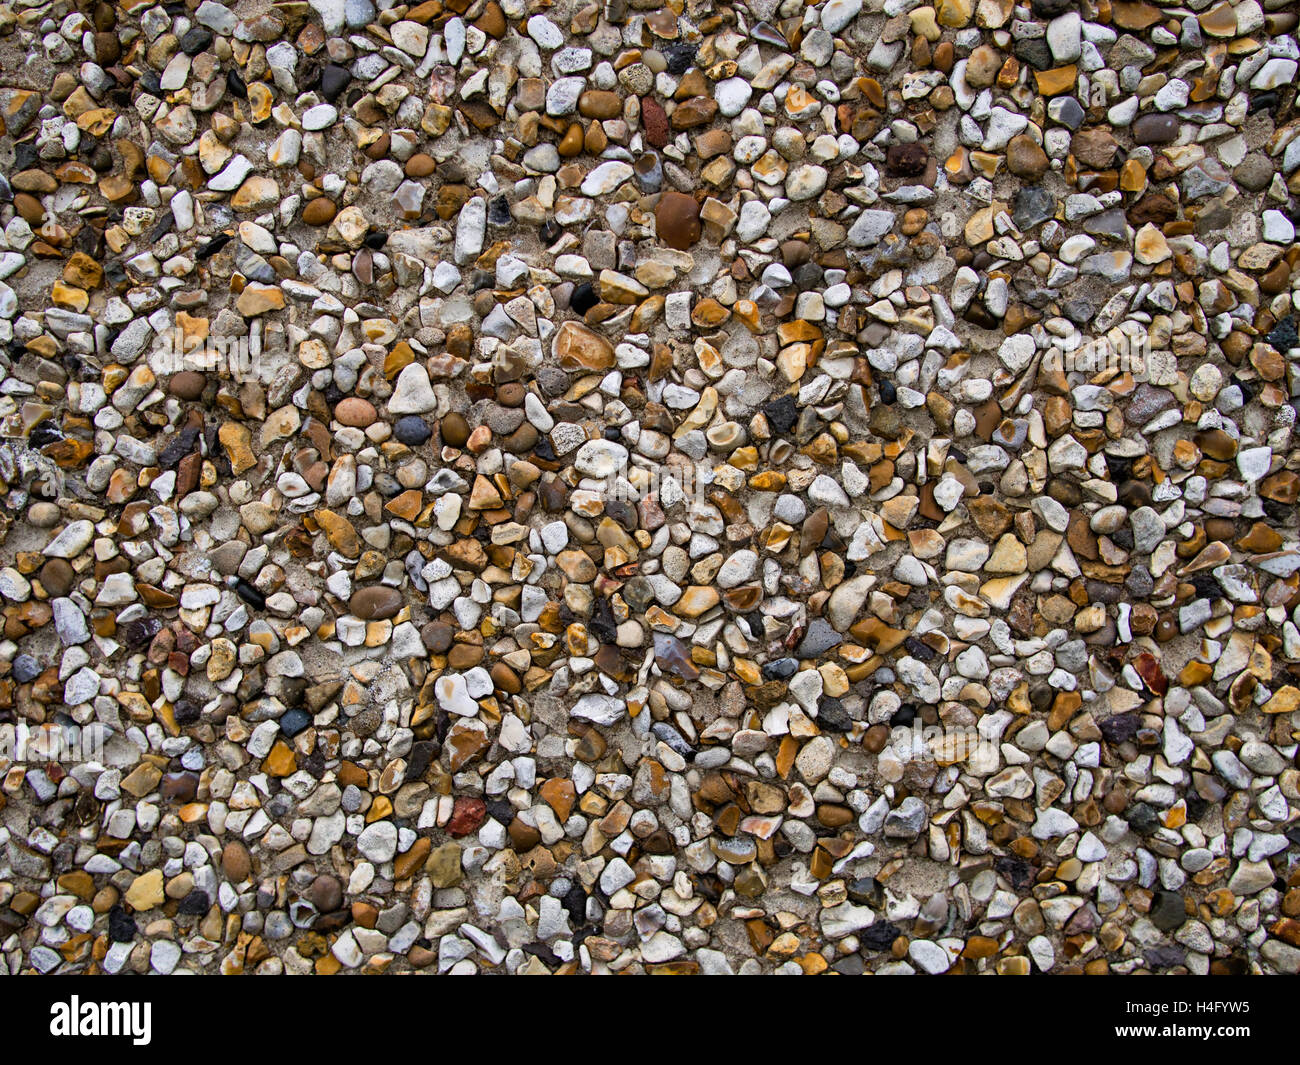 Pebbledash detail. Traditional material for cladding homes. Stock Photo